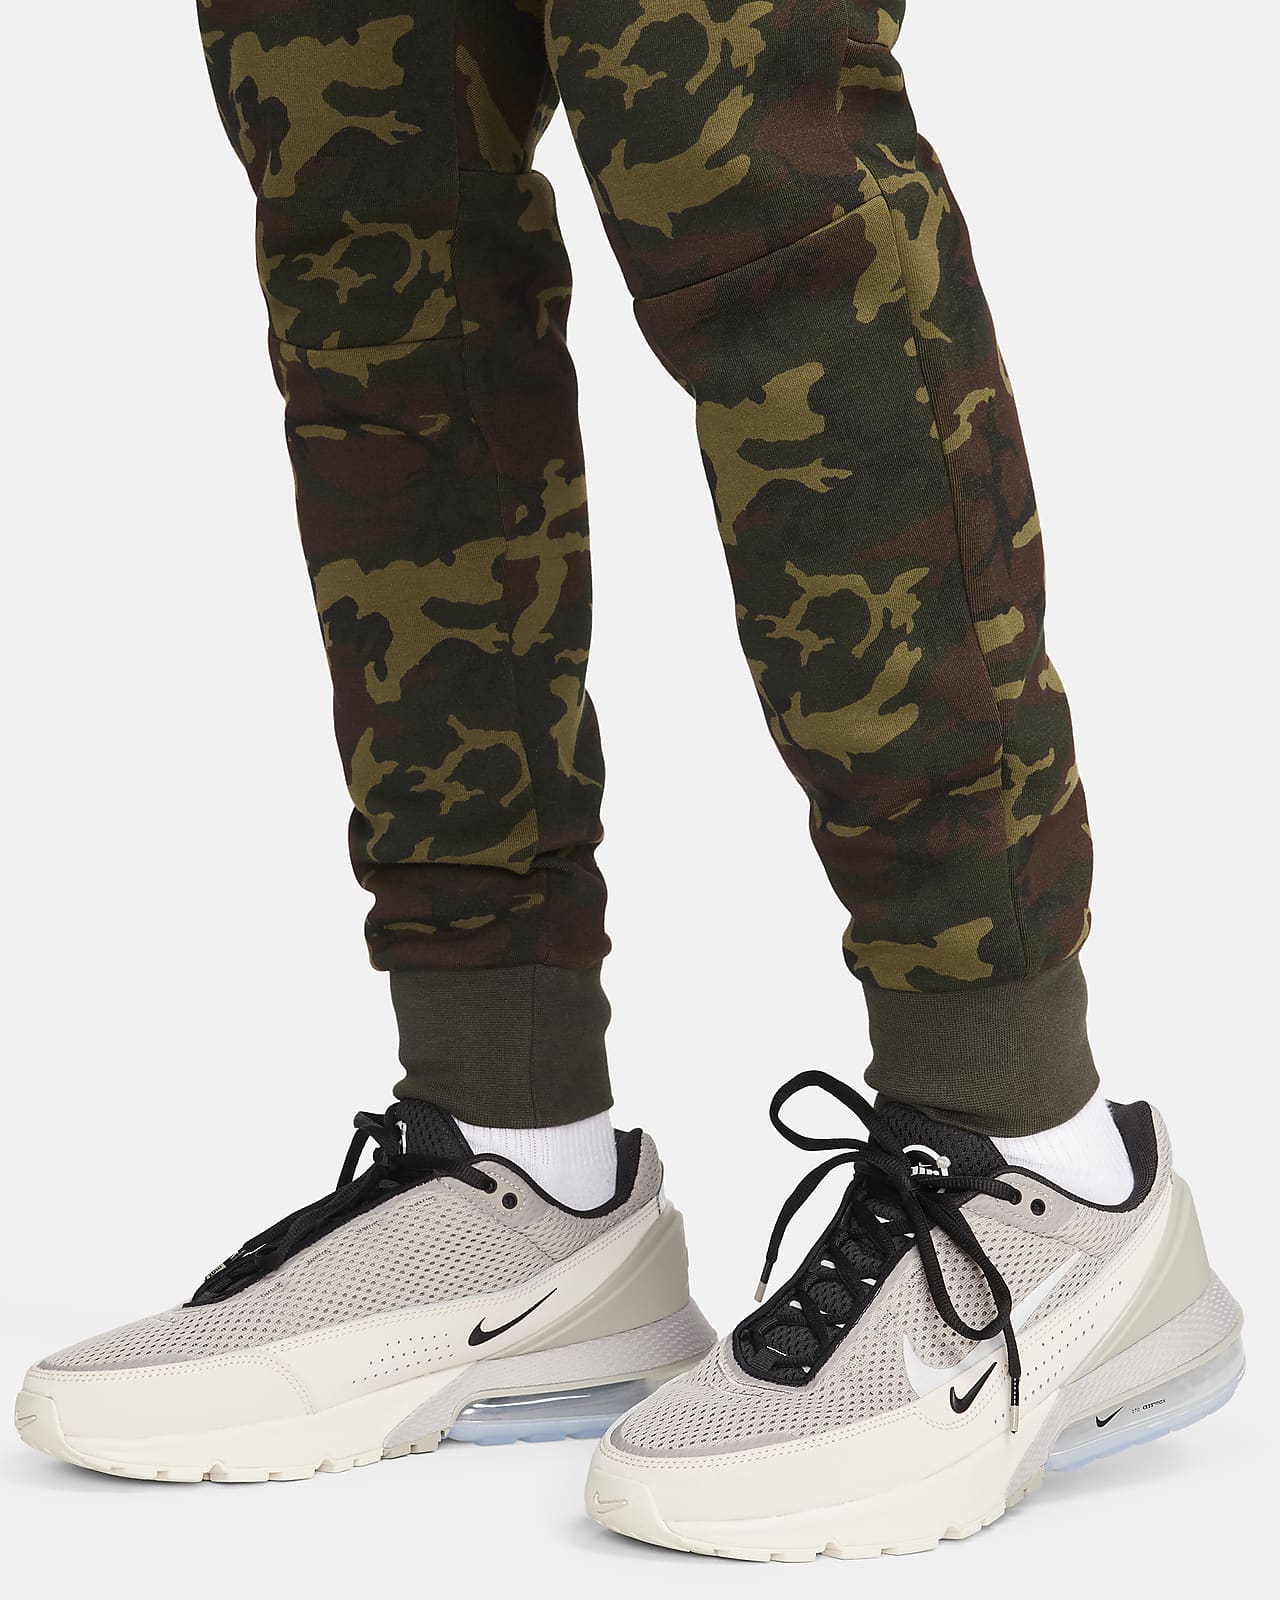 Green Camo Army Design - Military Themed - Stretchy Leggings at